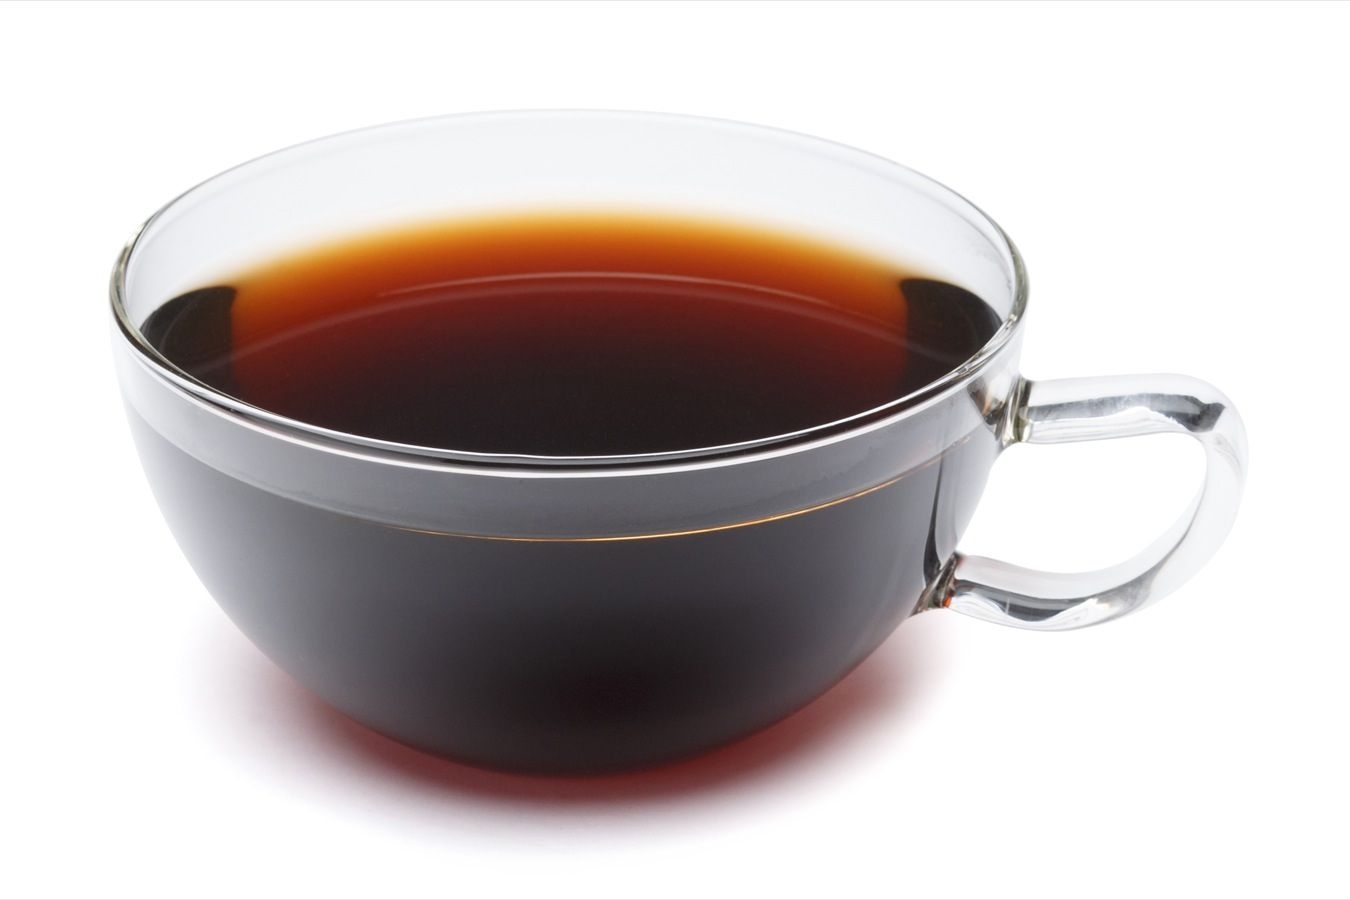 Lower Your Cholesterol with Pu-erh - The Real Black Tea ...